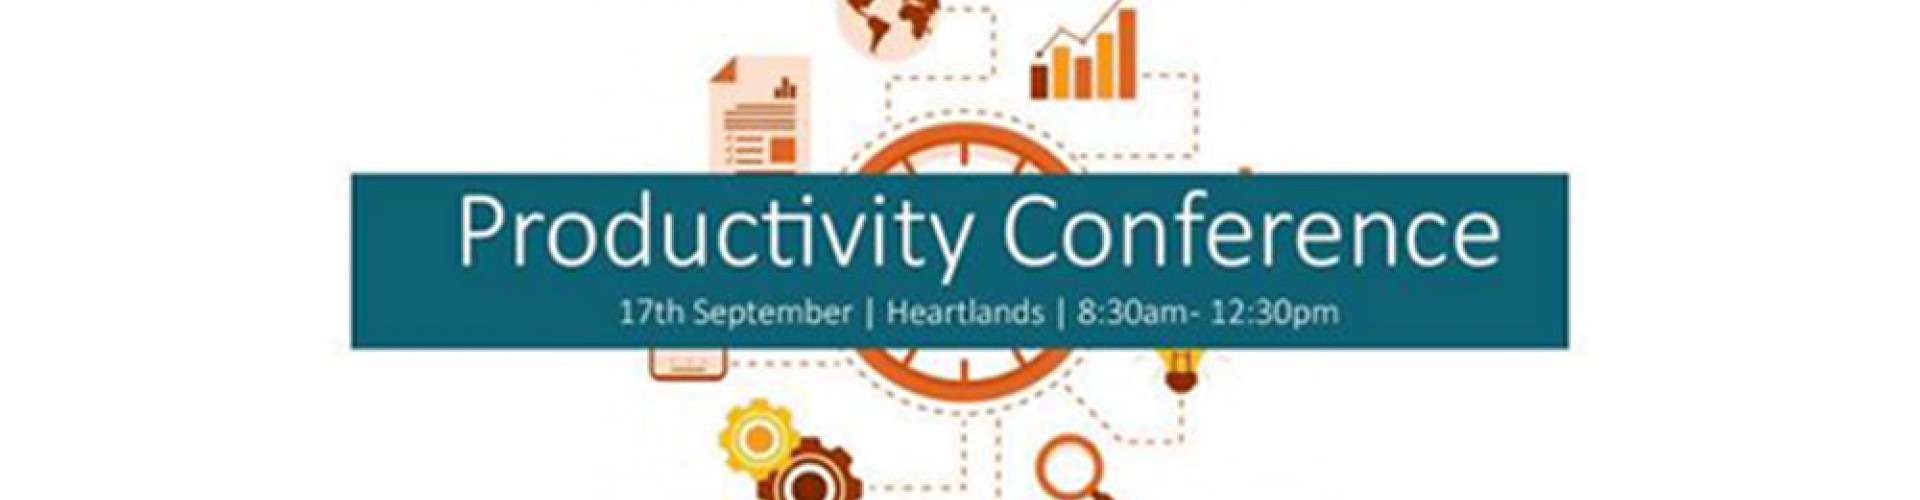 productivity conference